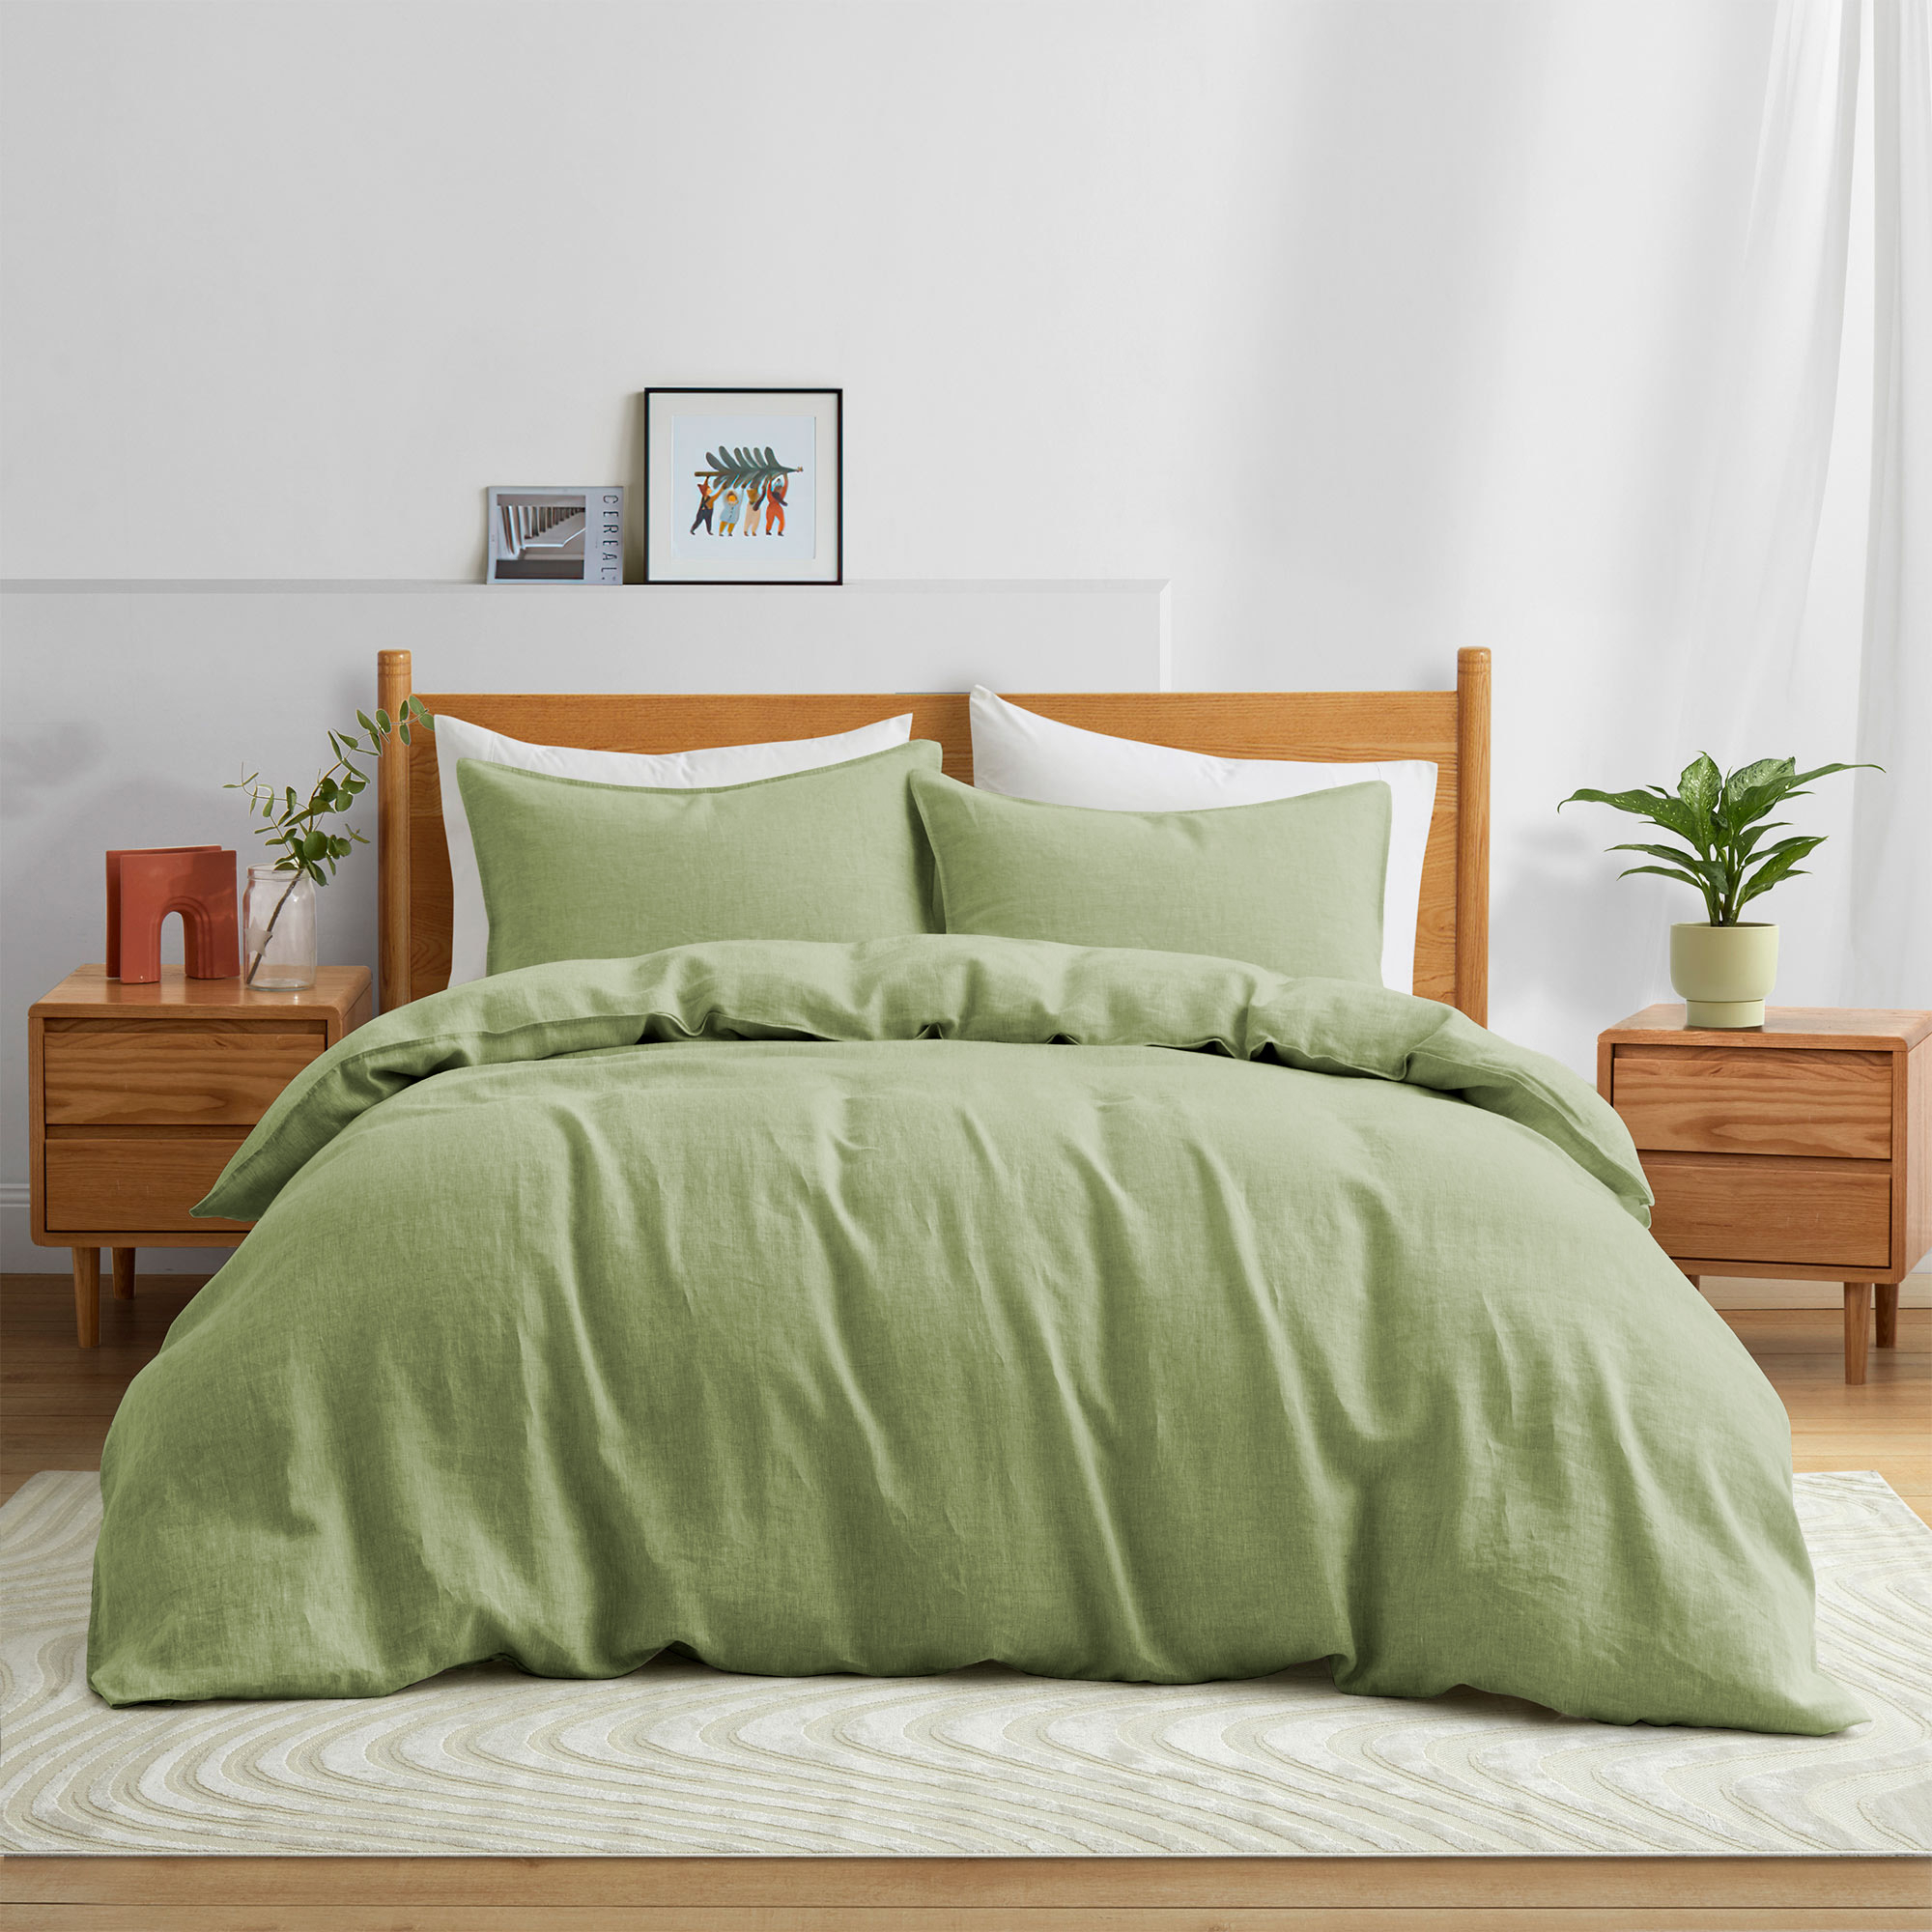 Premium Flax Linen Duvet Cover Set With Pillowcases Moisture Wicking And Breathable - Verdant Green, King